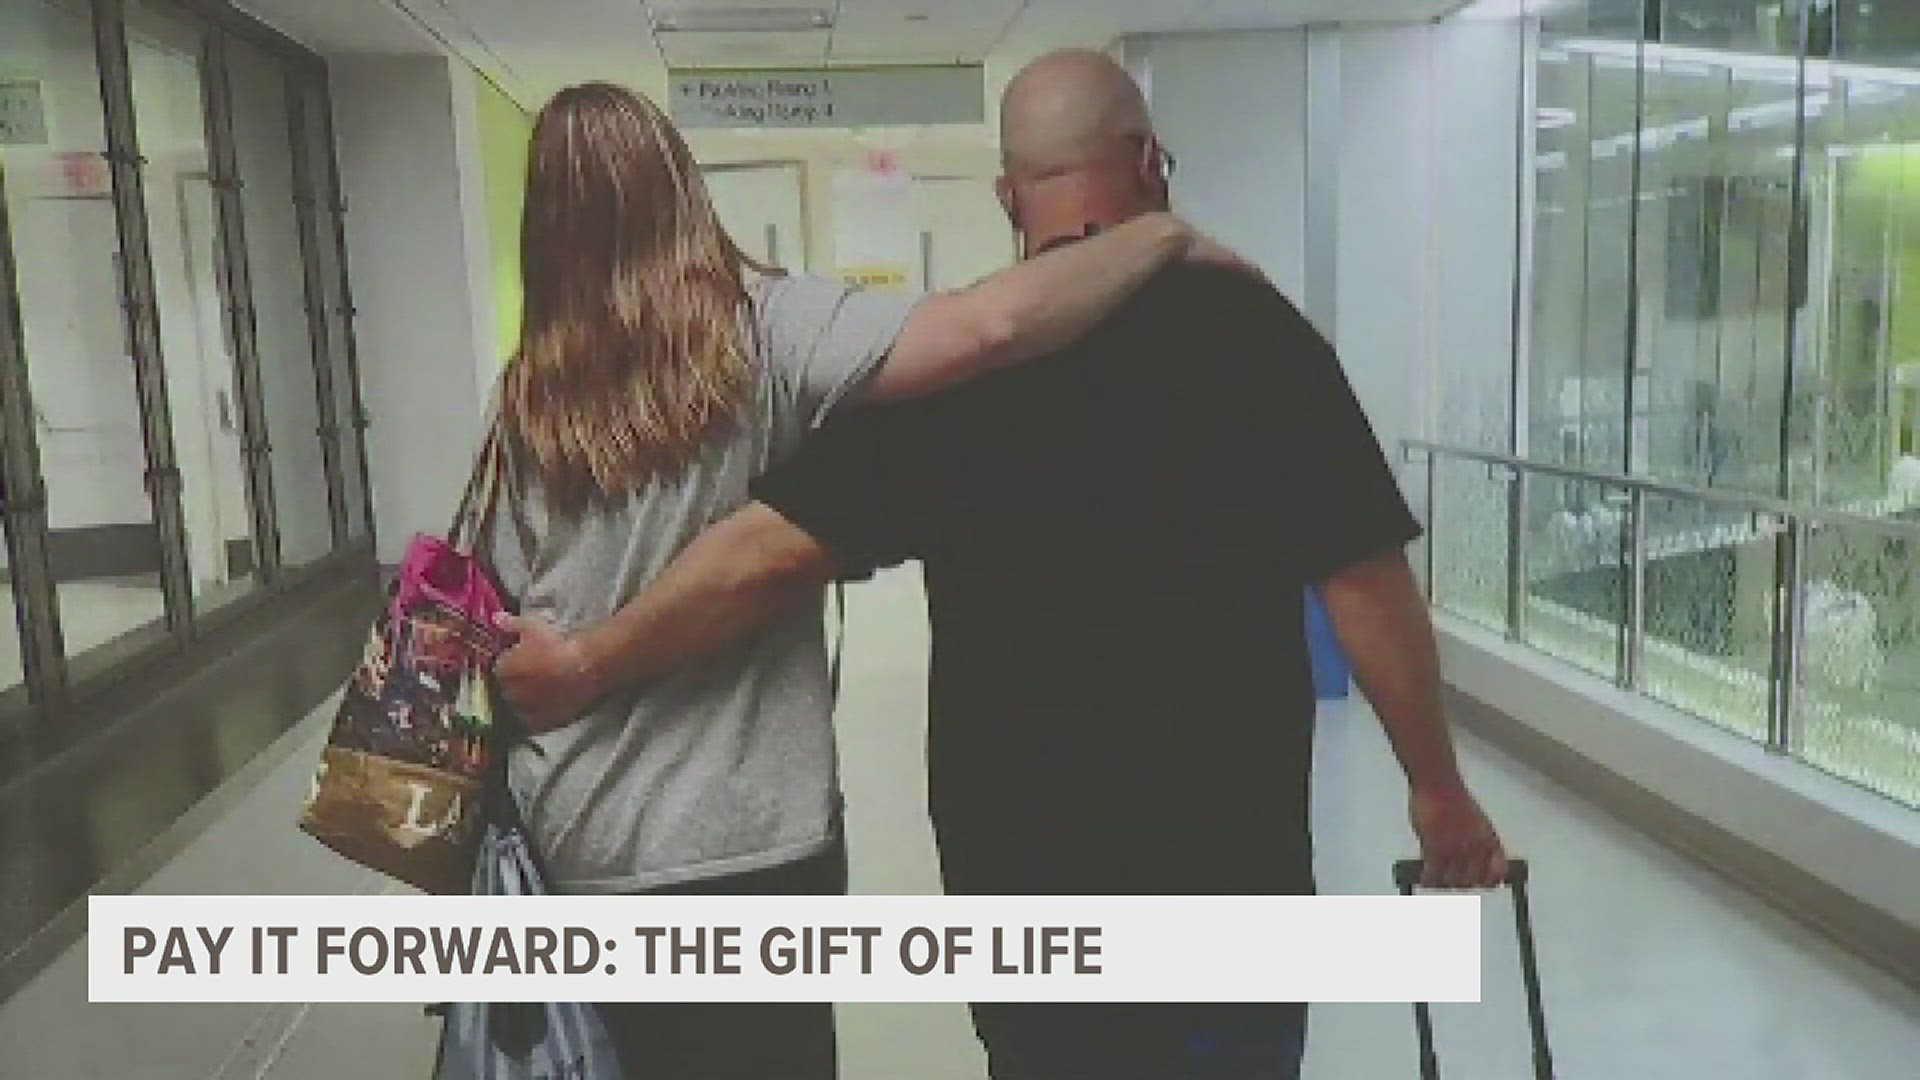 Beth Register donated her kidney to her cousin, changing his life completely and earning her the Pay It Forward award